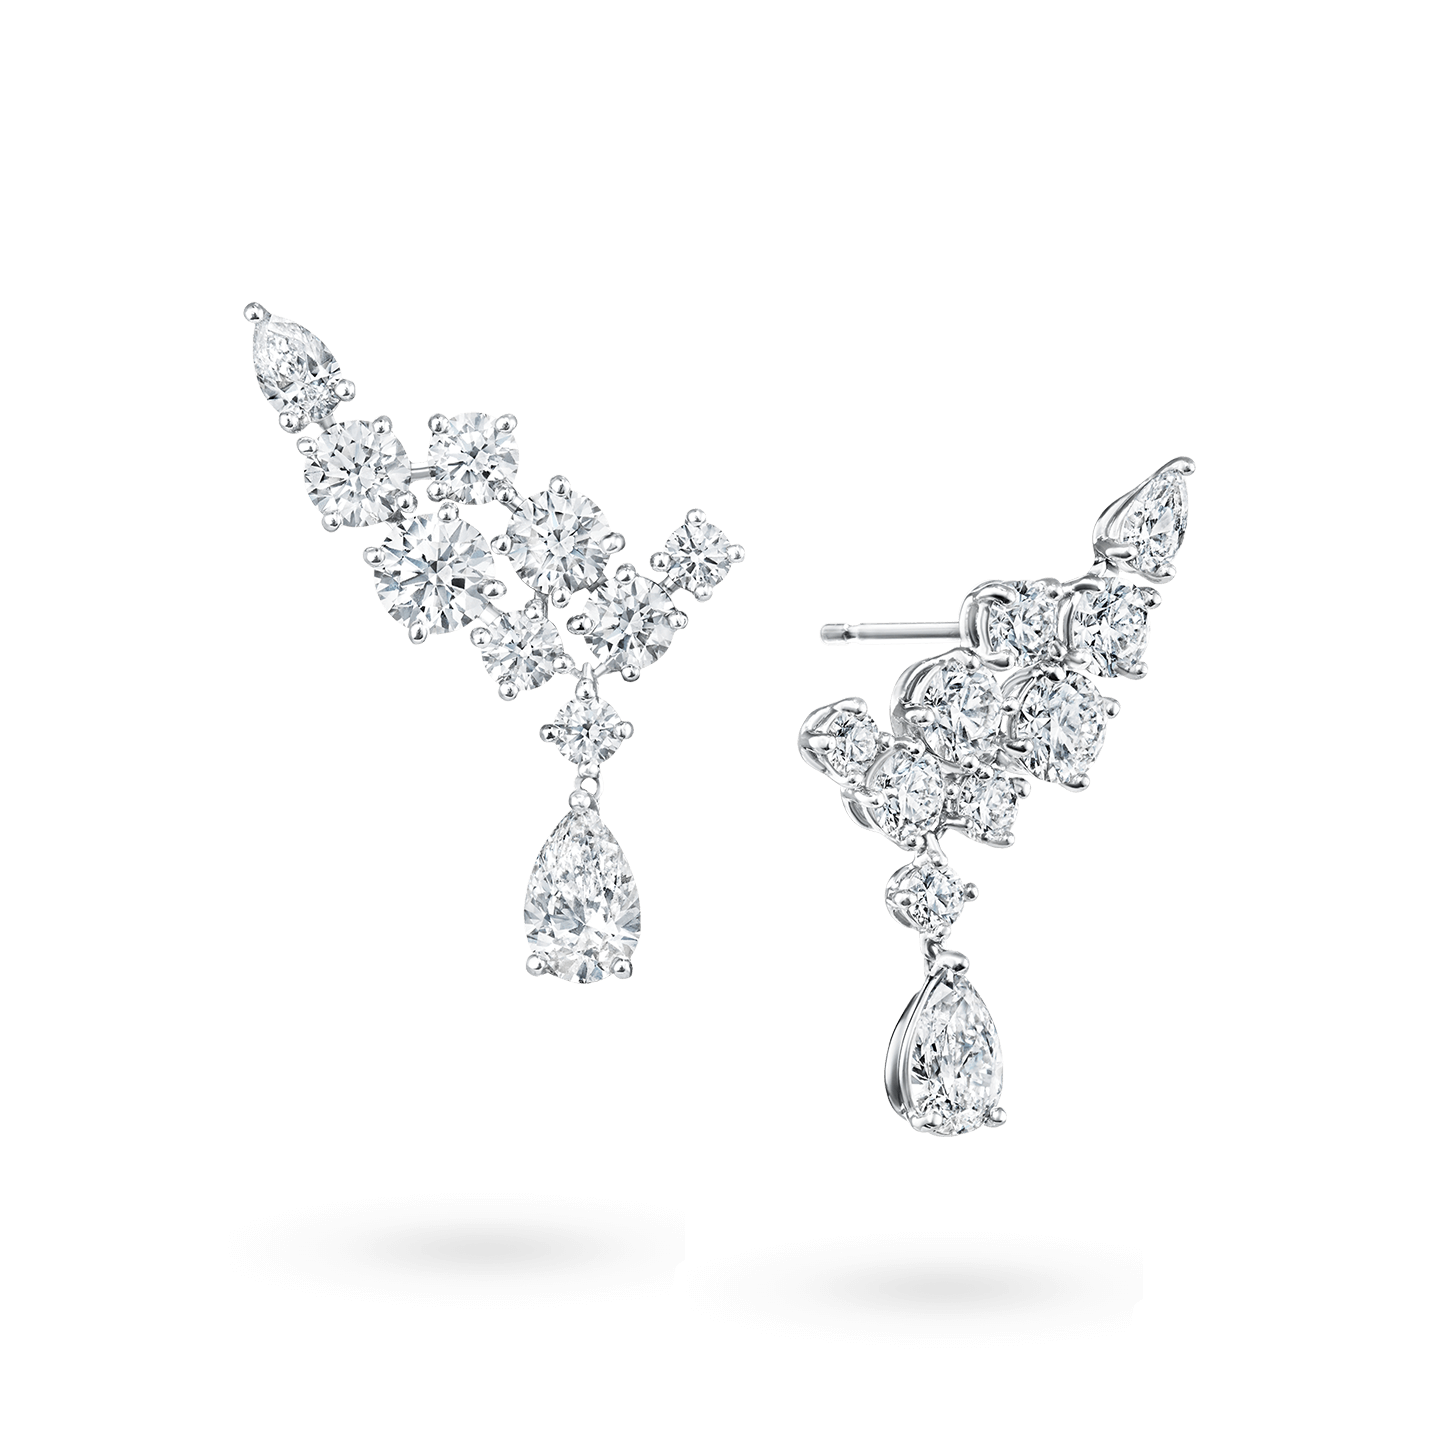 Sparkling Cluster Diamond Earrings, Product Image 2